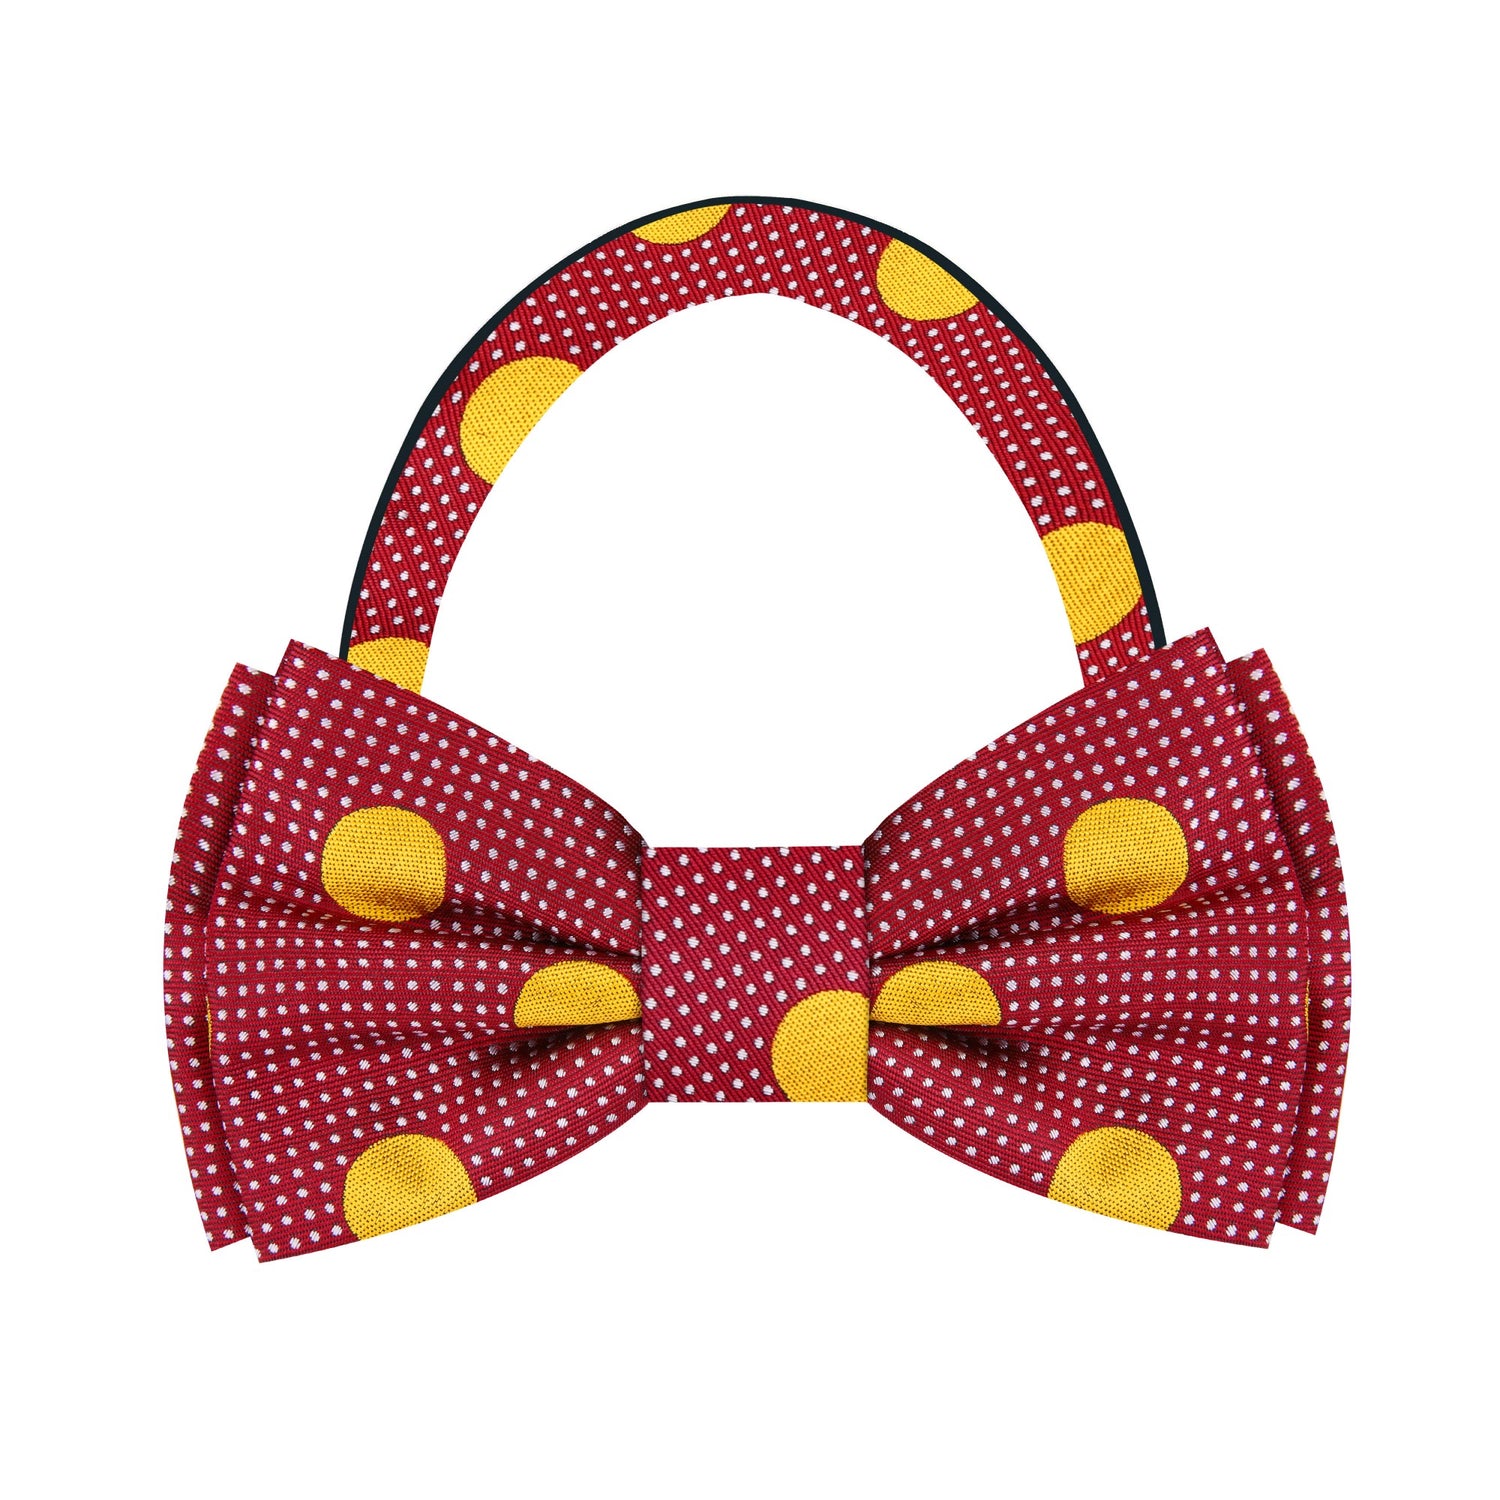 Deep Red Yellow Polka Dot Pre Tied Bow Tie